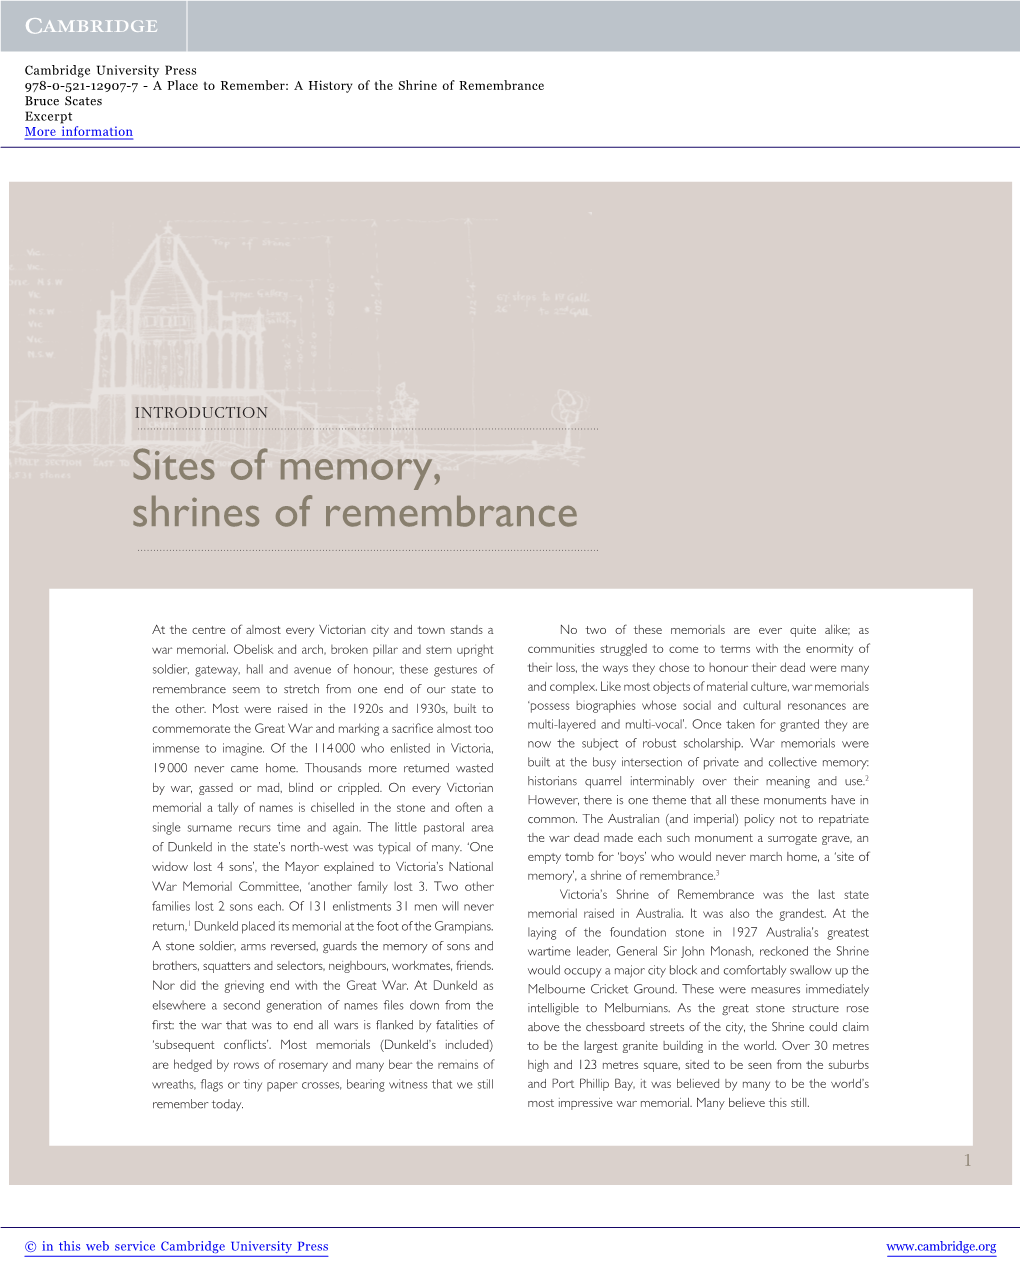 Sites of Memory, Shrines of Remembrance